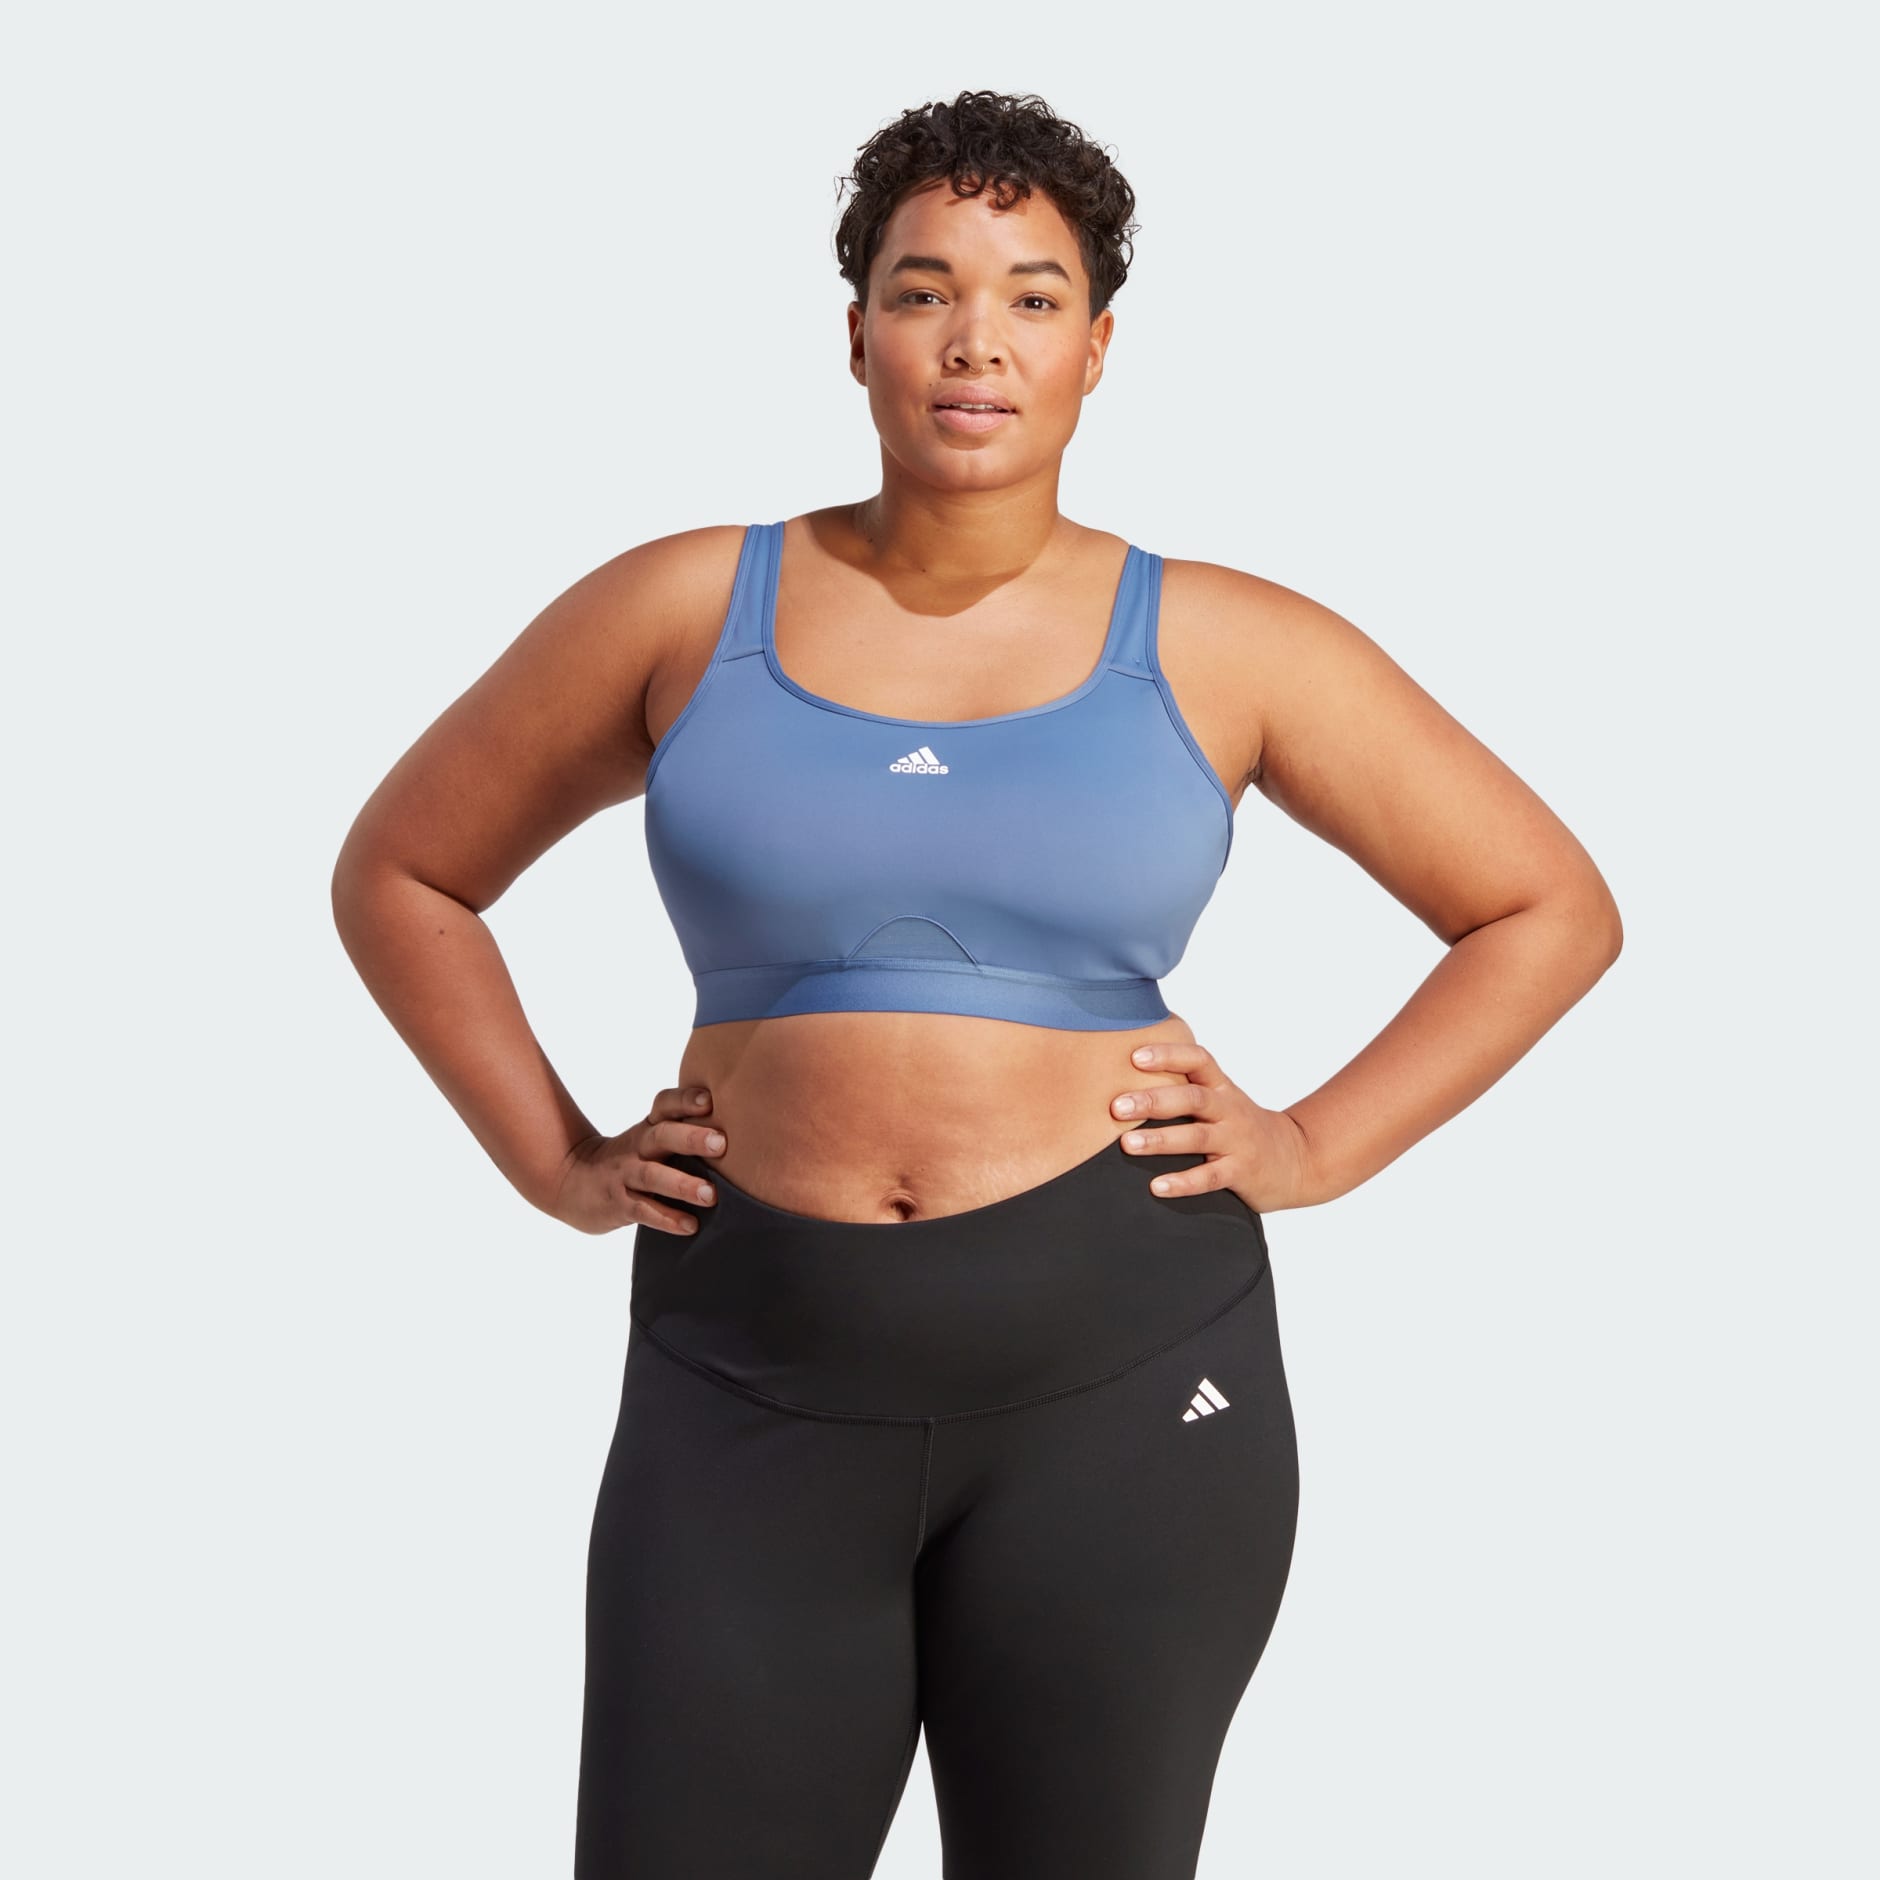 Women's Clothing - adidas TLRD Move Training High-Support Bra (Plus Size) -  Blue